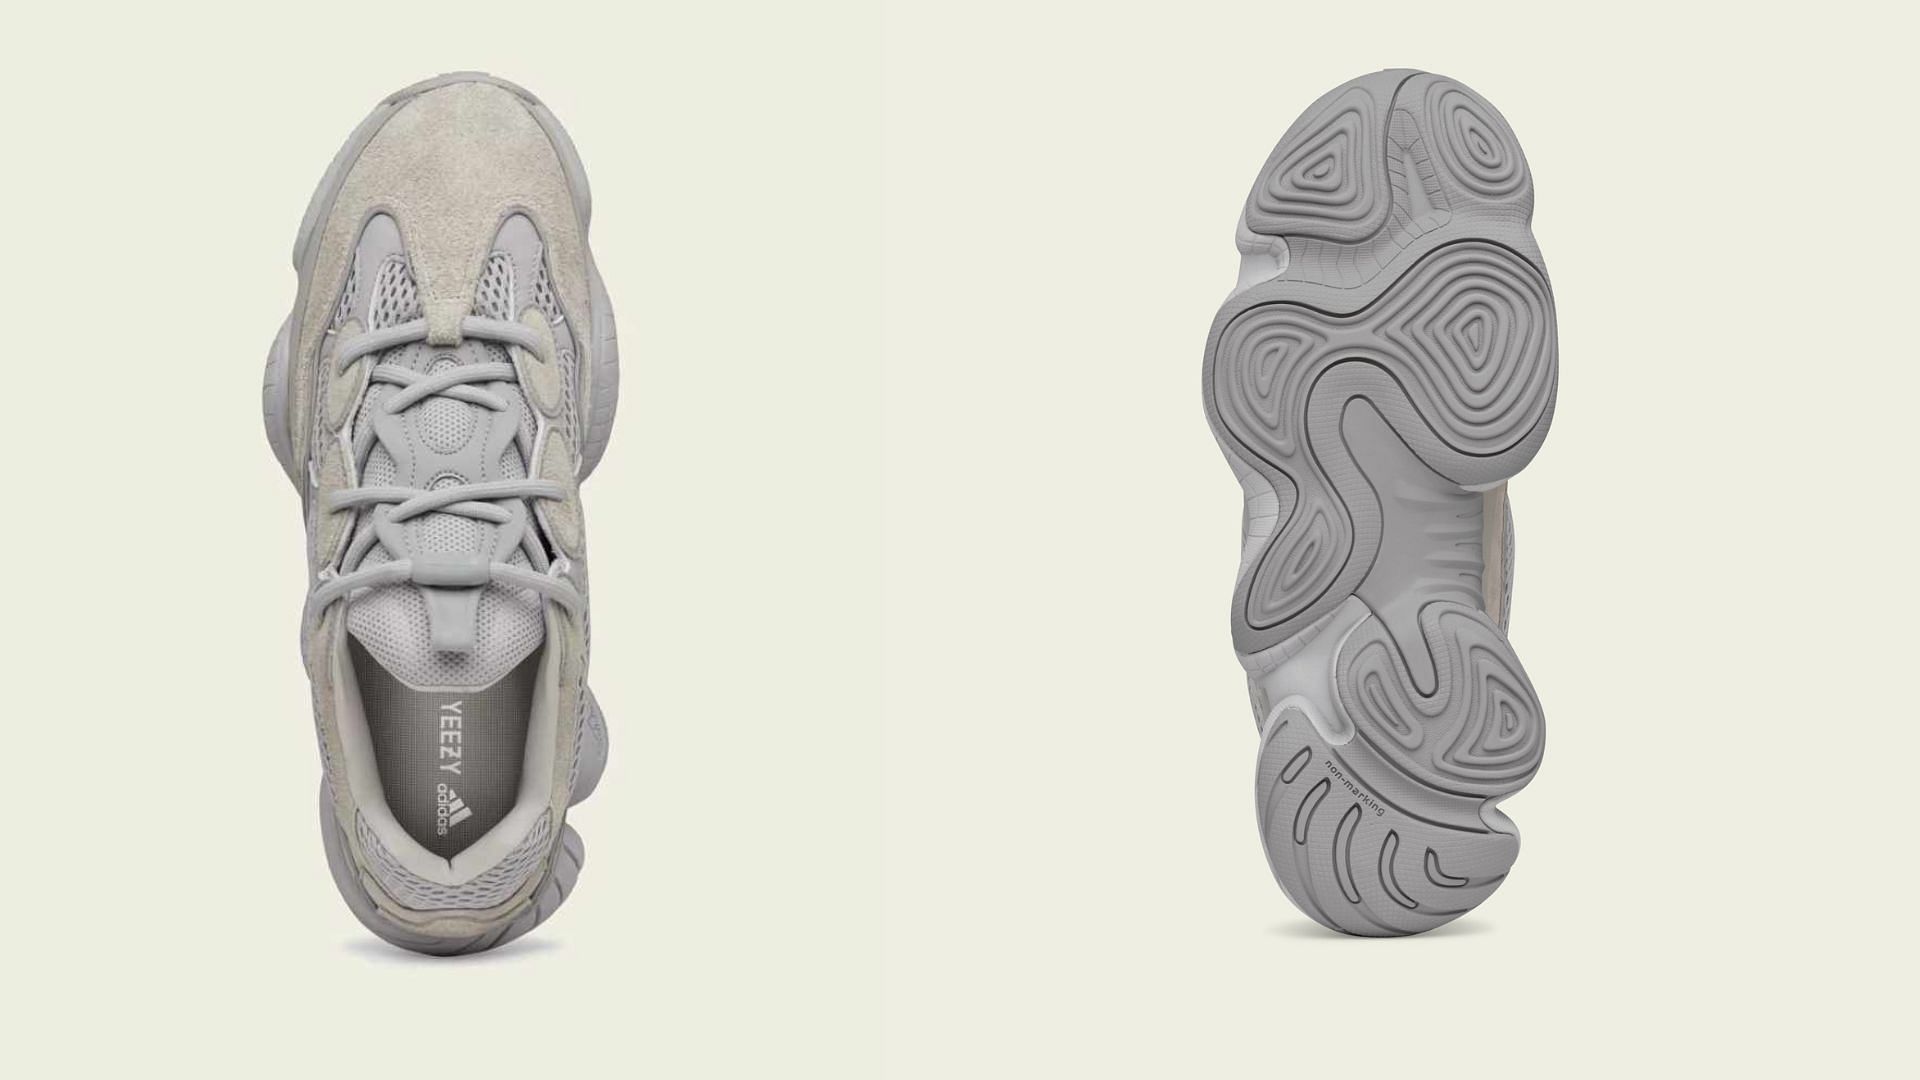 A closer look at the Adidas Yeezy 500 Stone Salt sneakers (Image via Adidas)